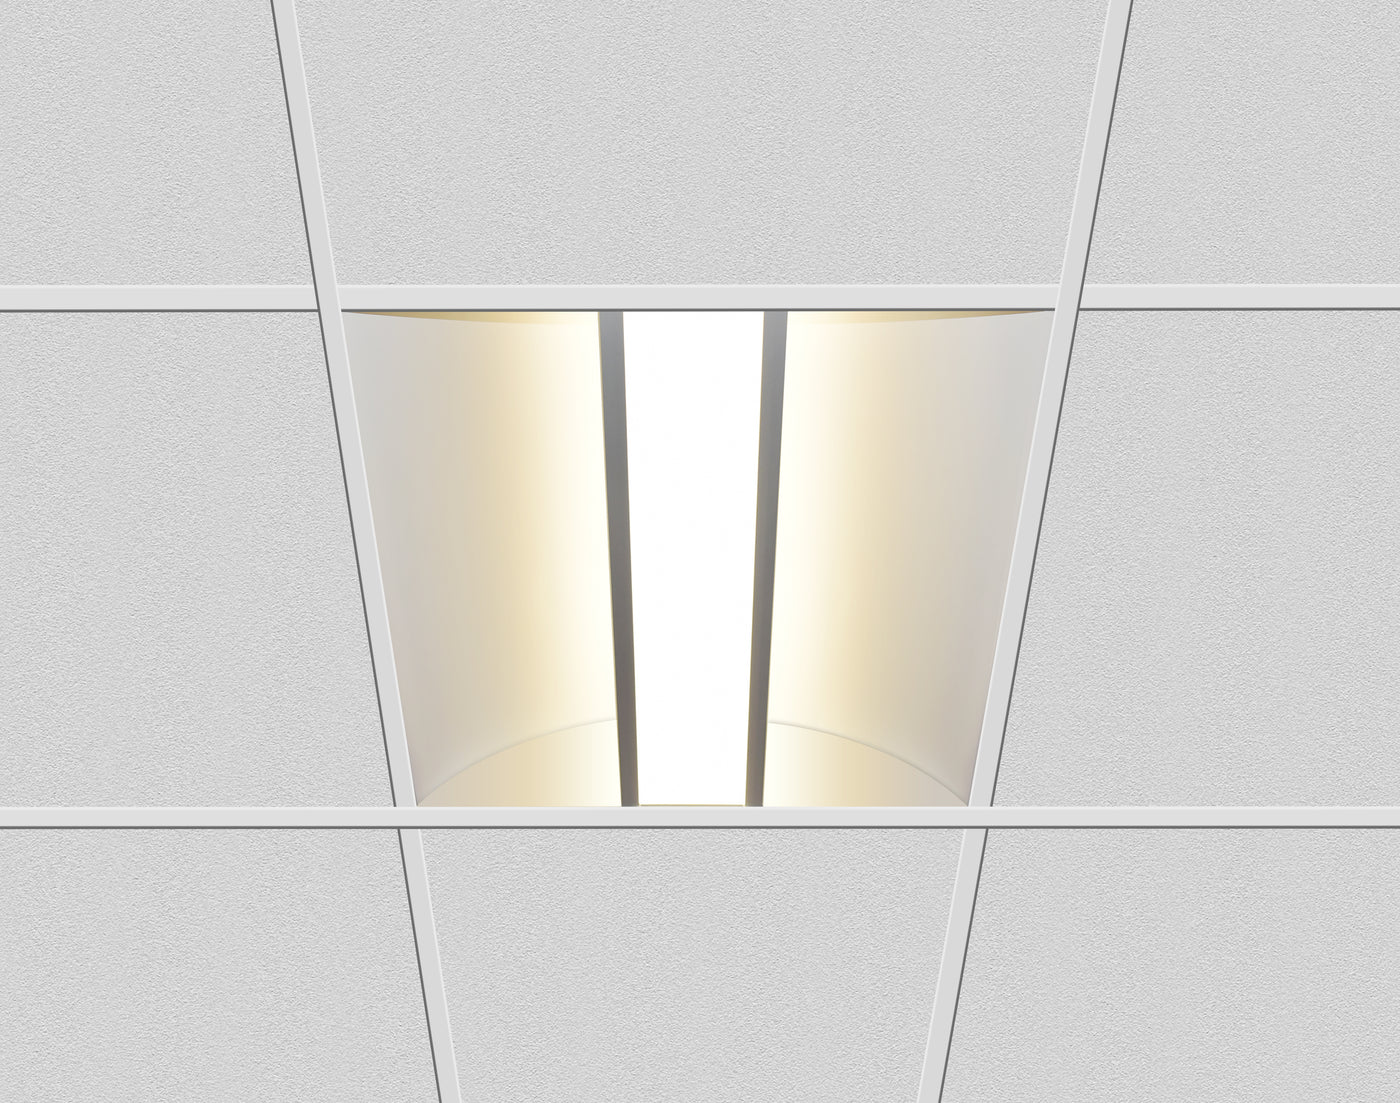 2x2 Premium Indirect LED Troffer, 4400 Lumen Max, Wattage and CCT Selectable, Dimming, 120-277V